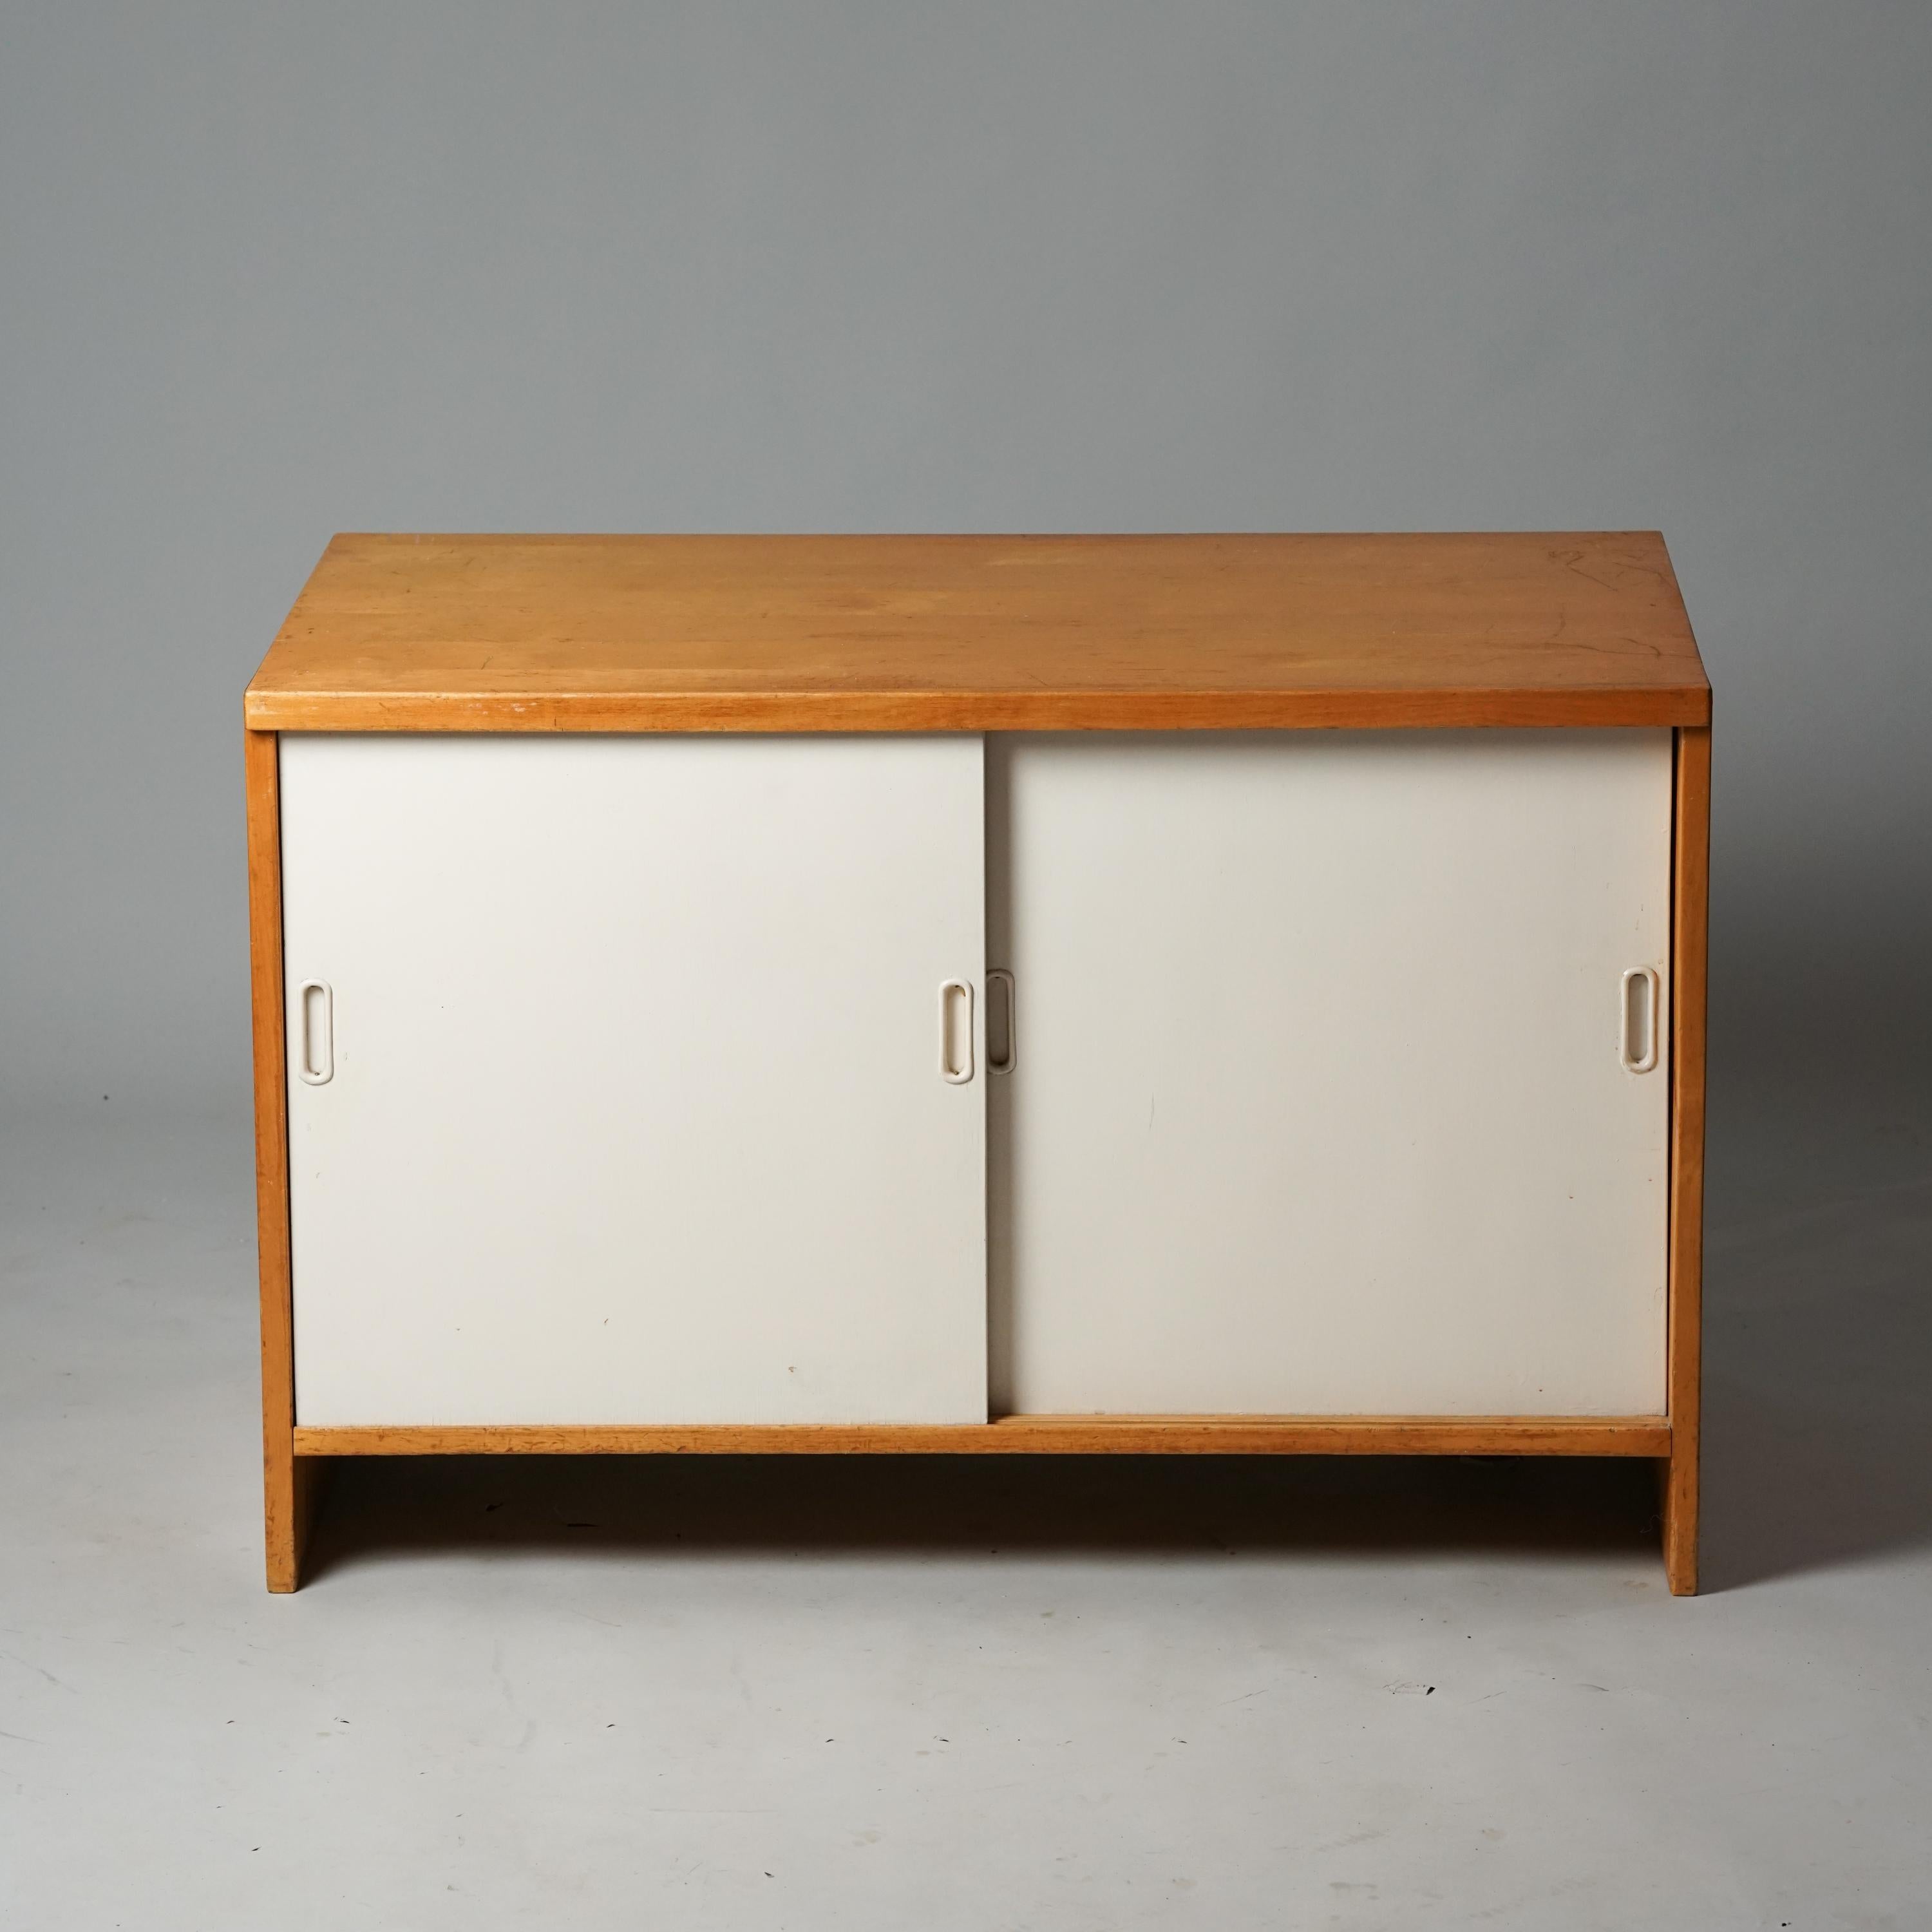 Cabinet Model 216, designed by Aino Aalto, manufactured by Oy Huonekalu- ja Rakennustyötehdas Ab, 1940s. Birch and painted birch. Good vintage condition, patina and minor wear consistent with age and use. 

Aino Aalto (1894-1949) was an architect,